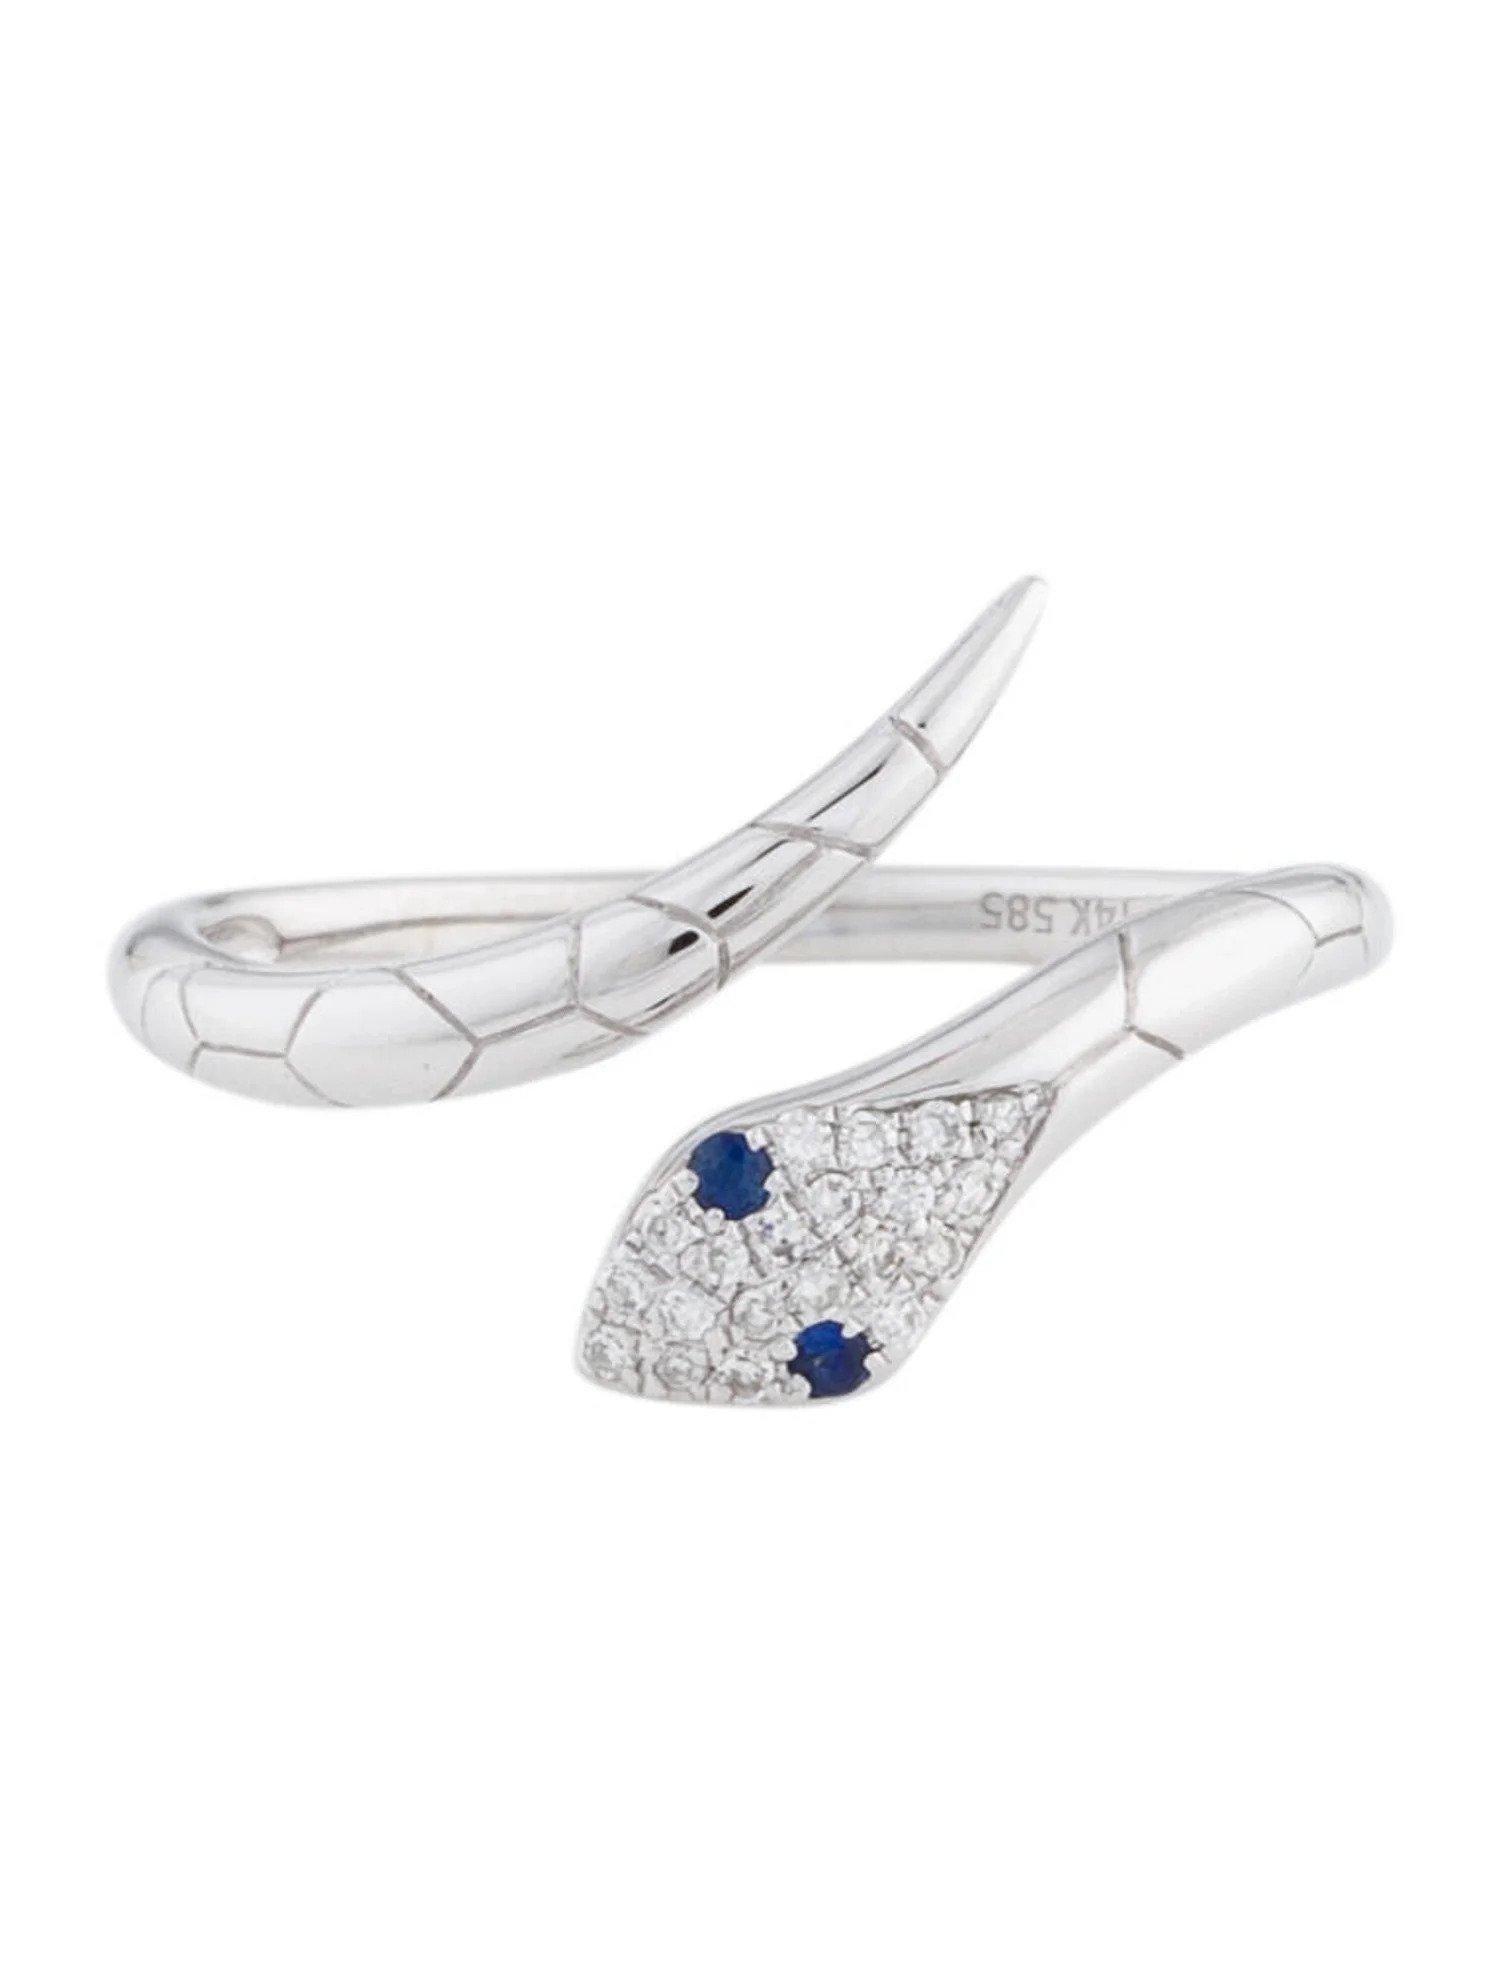 Contemporary 14K White Gold Diamond & Sapphire Open Snake Ring for Her For Sale